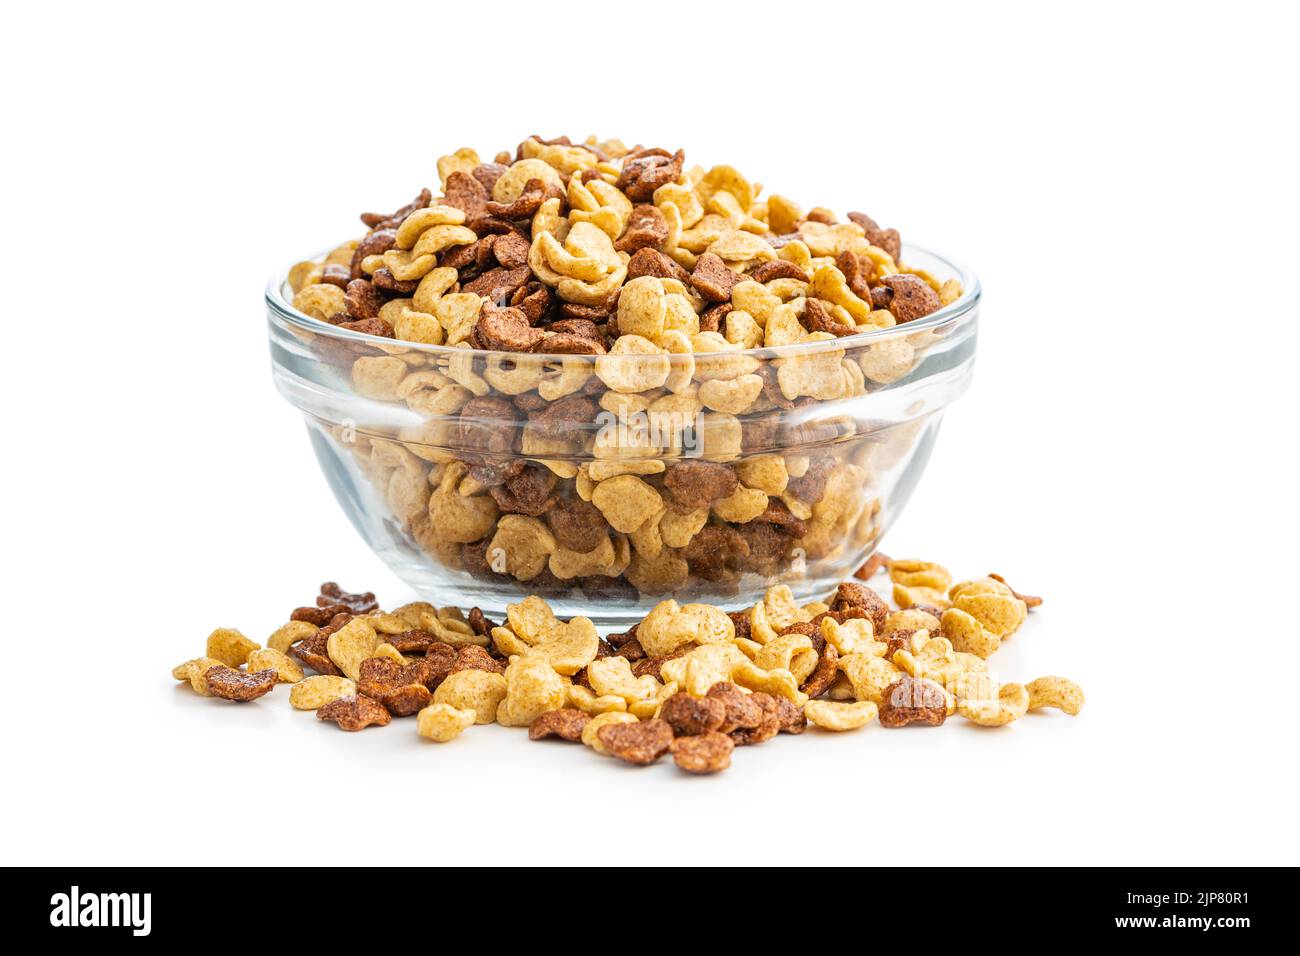 Breakfast cereal flakes in bowl isolated on a white background. Stock Photo